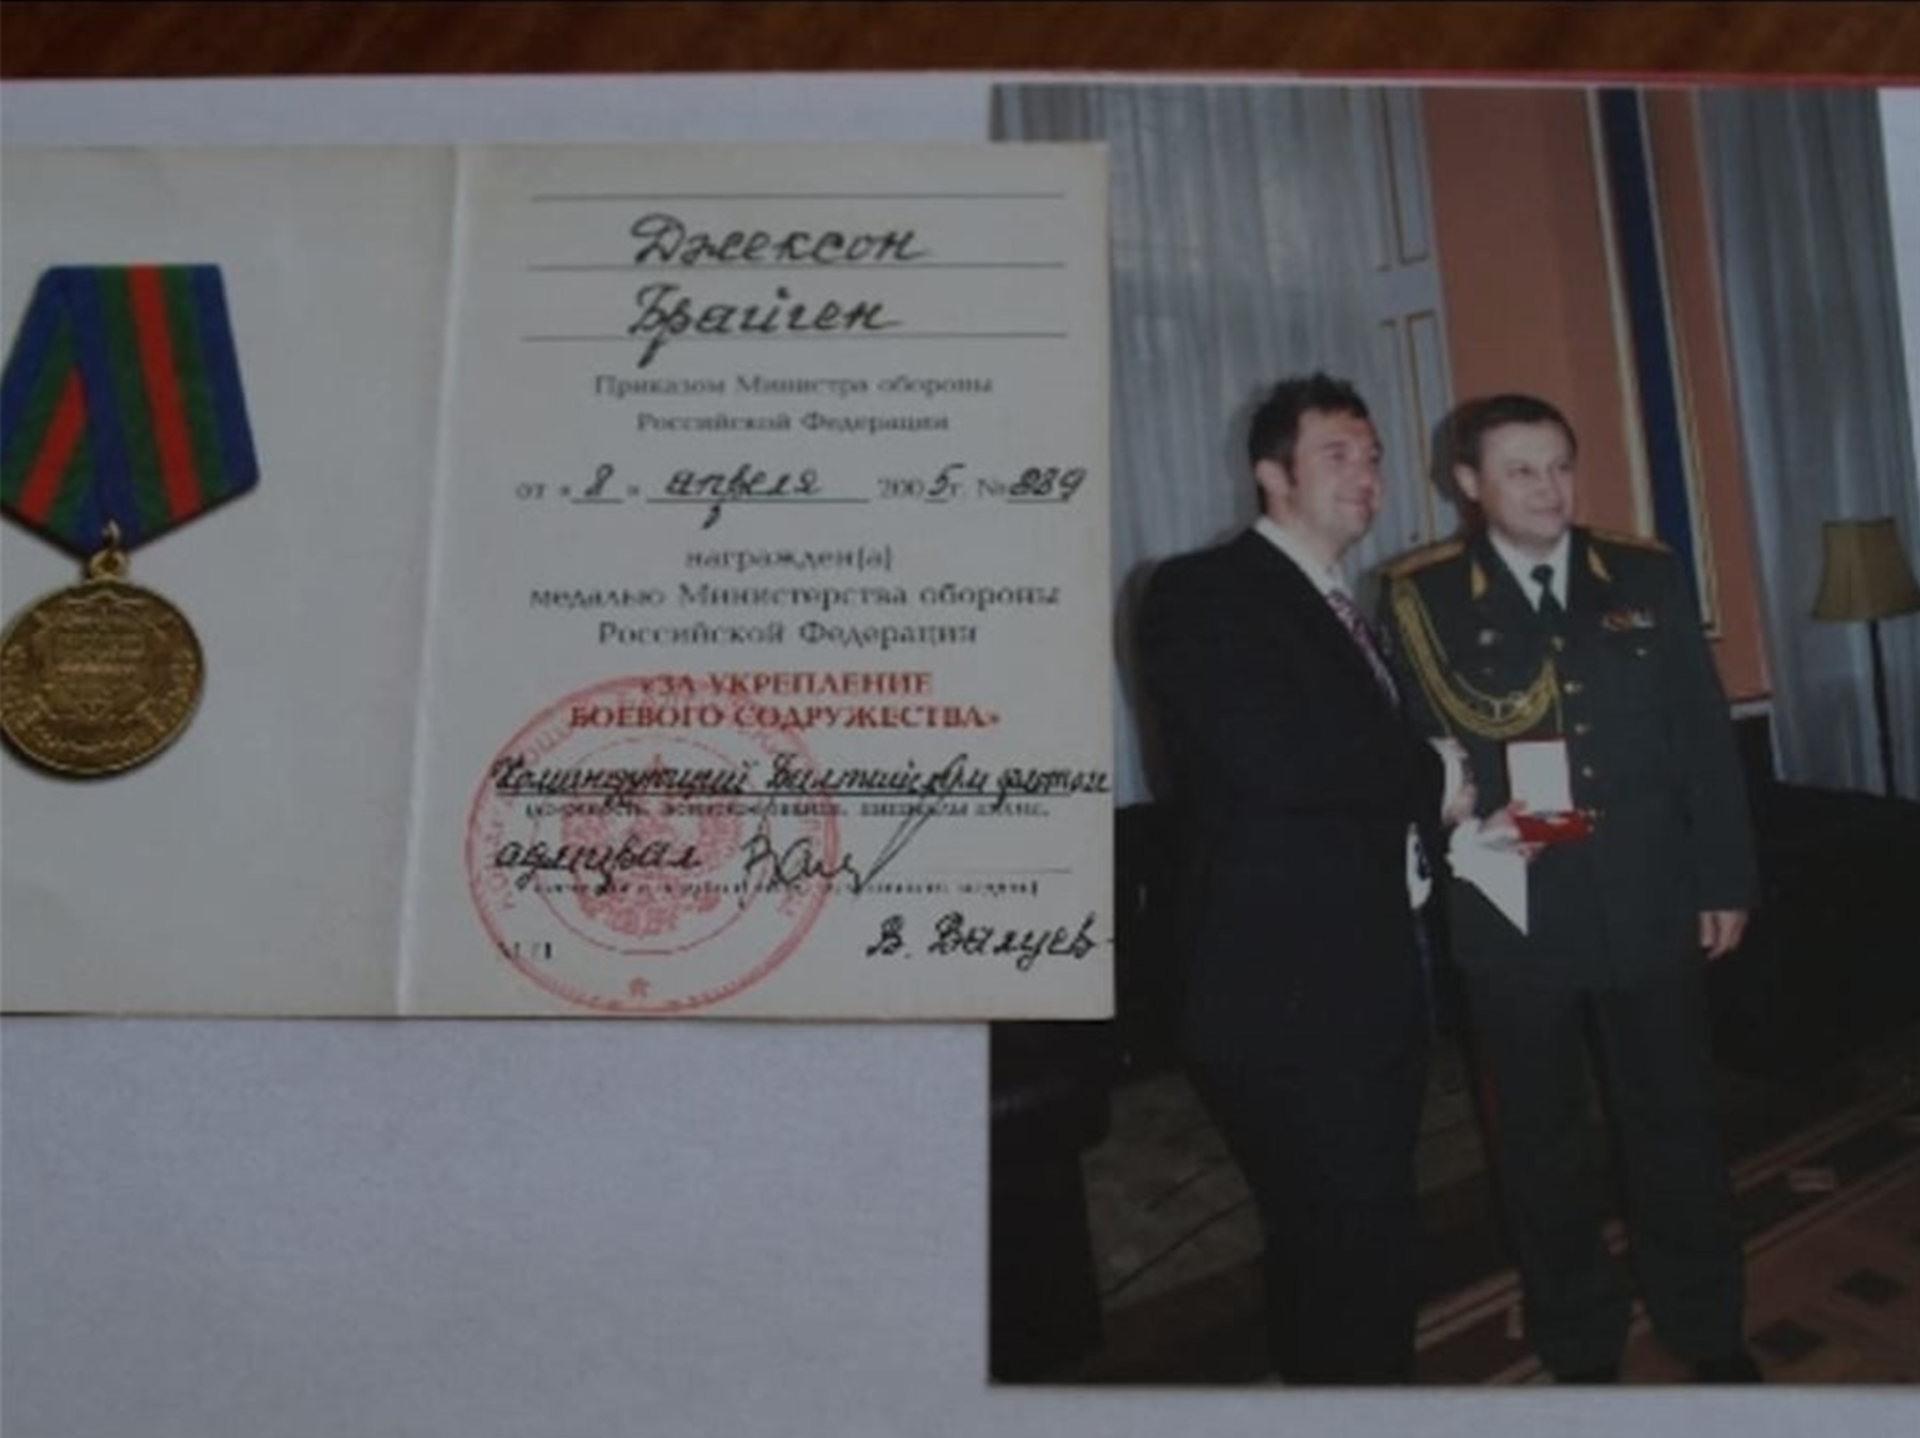 Extremely Rare Modern Russian Gallantry Award To A Royal Navy Medic - Image 2 of 4